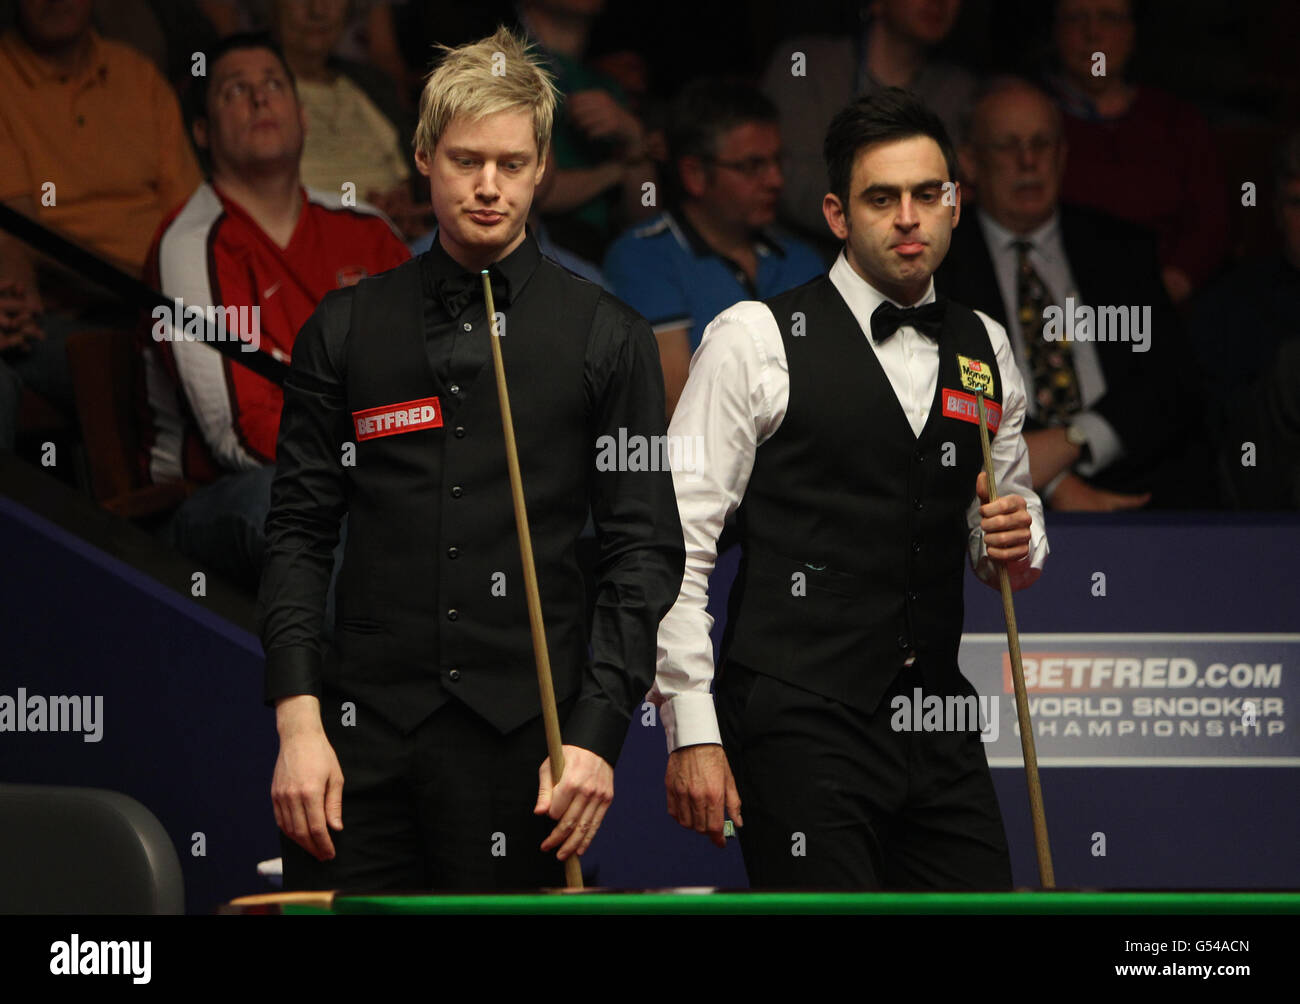 Australias Neil Robertson (left) during his match against Englands Ronnie OSullivan during the Betfred World Snooker Championships at the Crucible Theatre, Sheffield Stock Photo